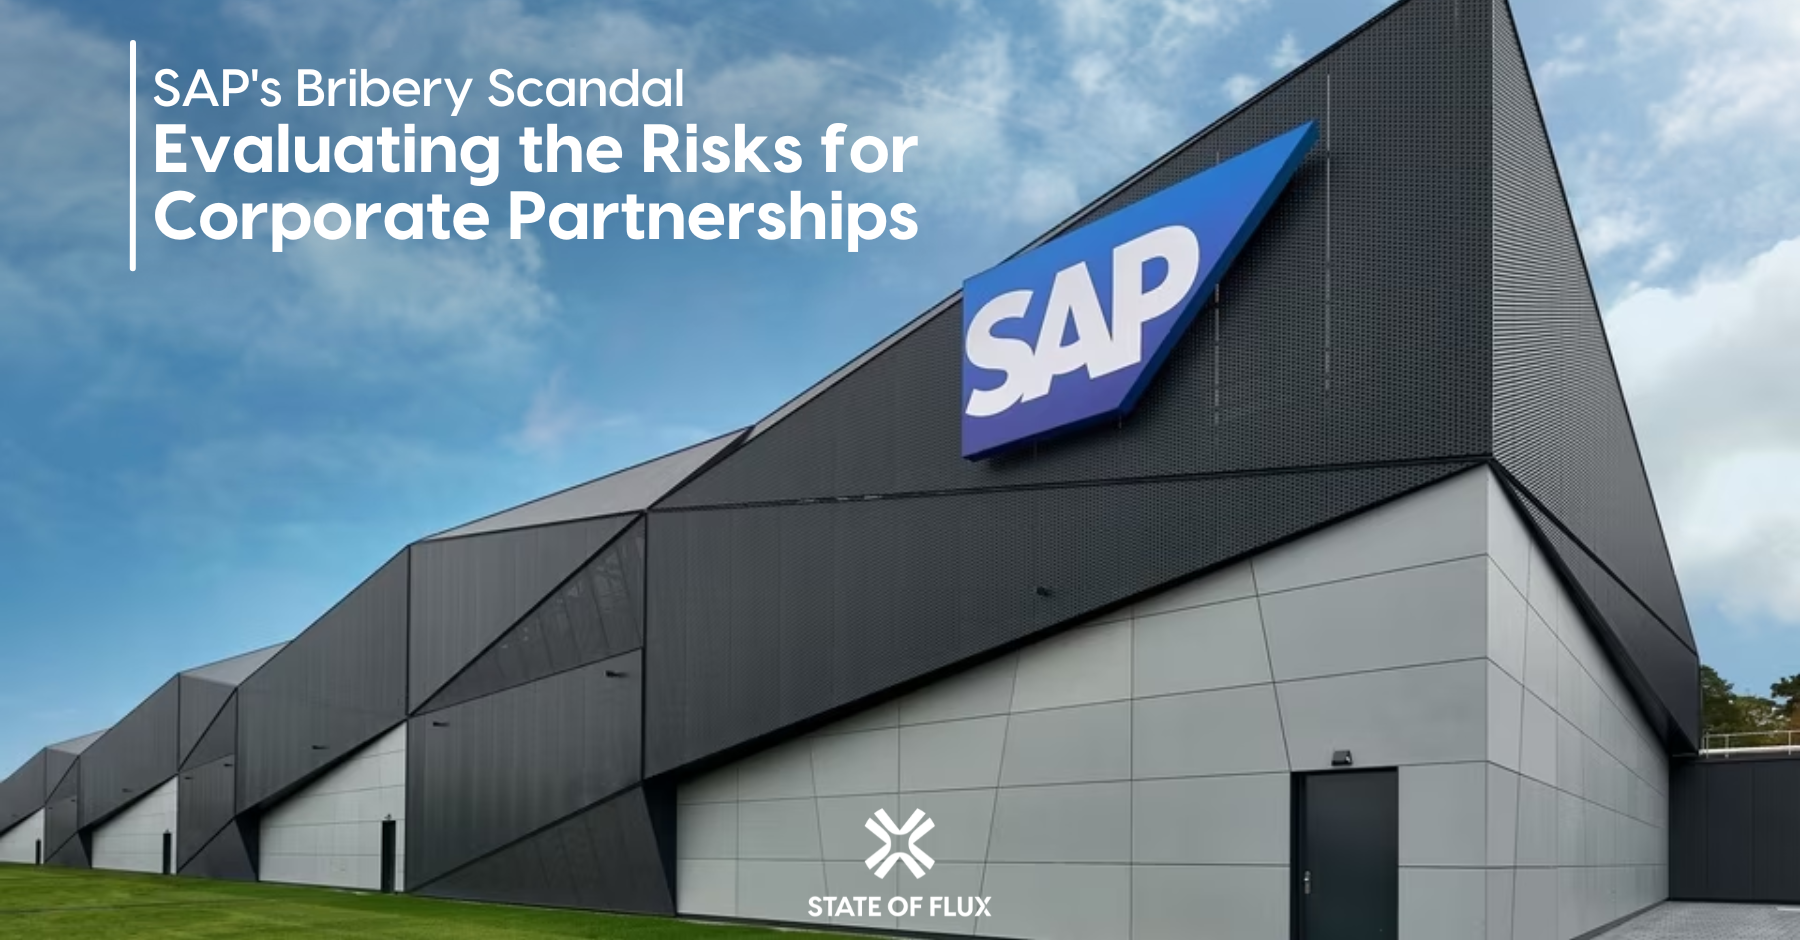 SAP's Bribery Scandal: Evaluating the Risks for Corporate Partnerships